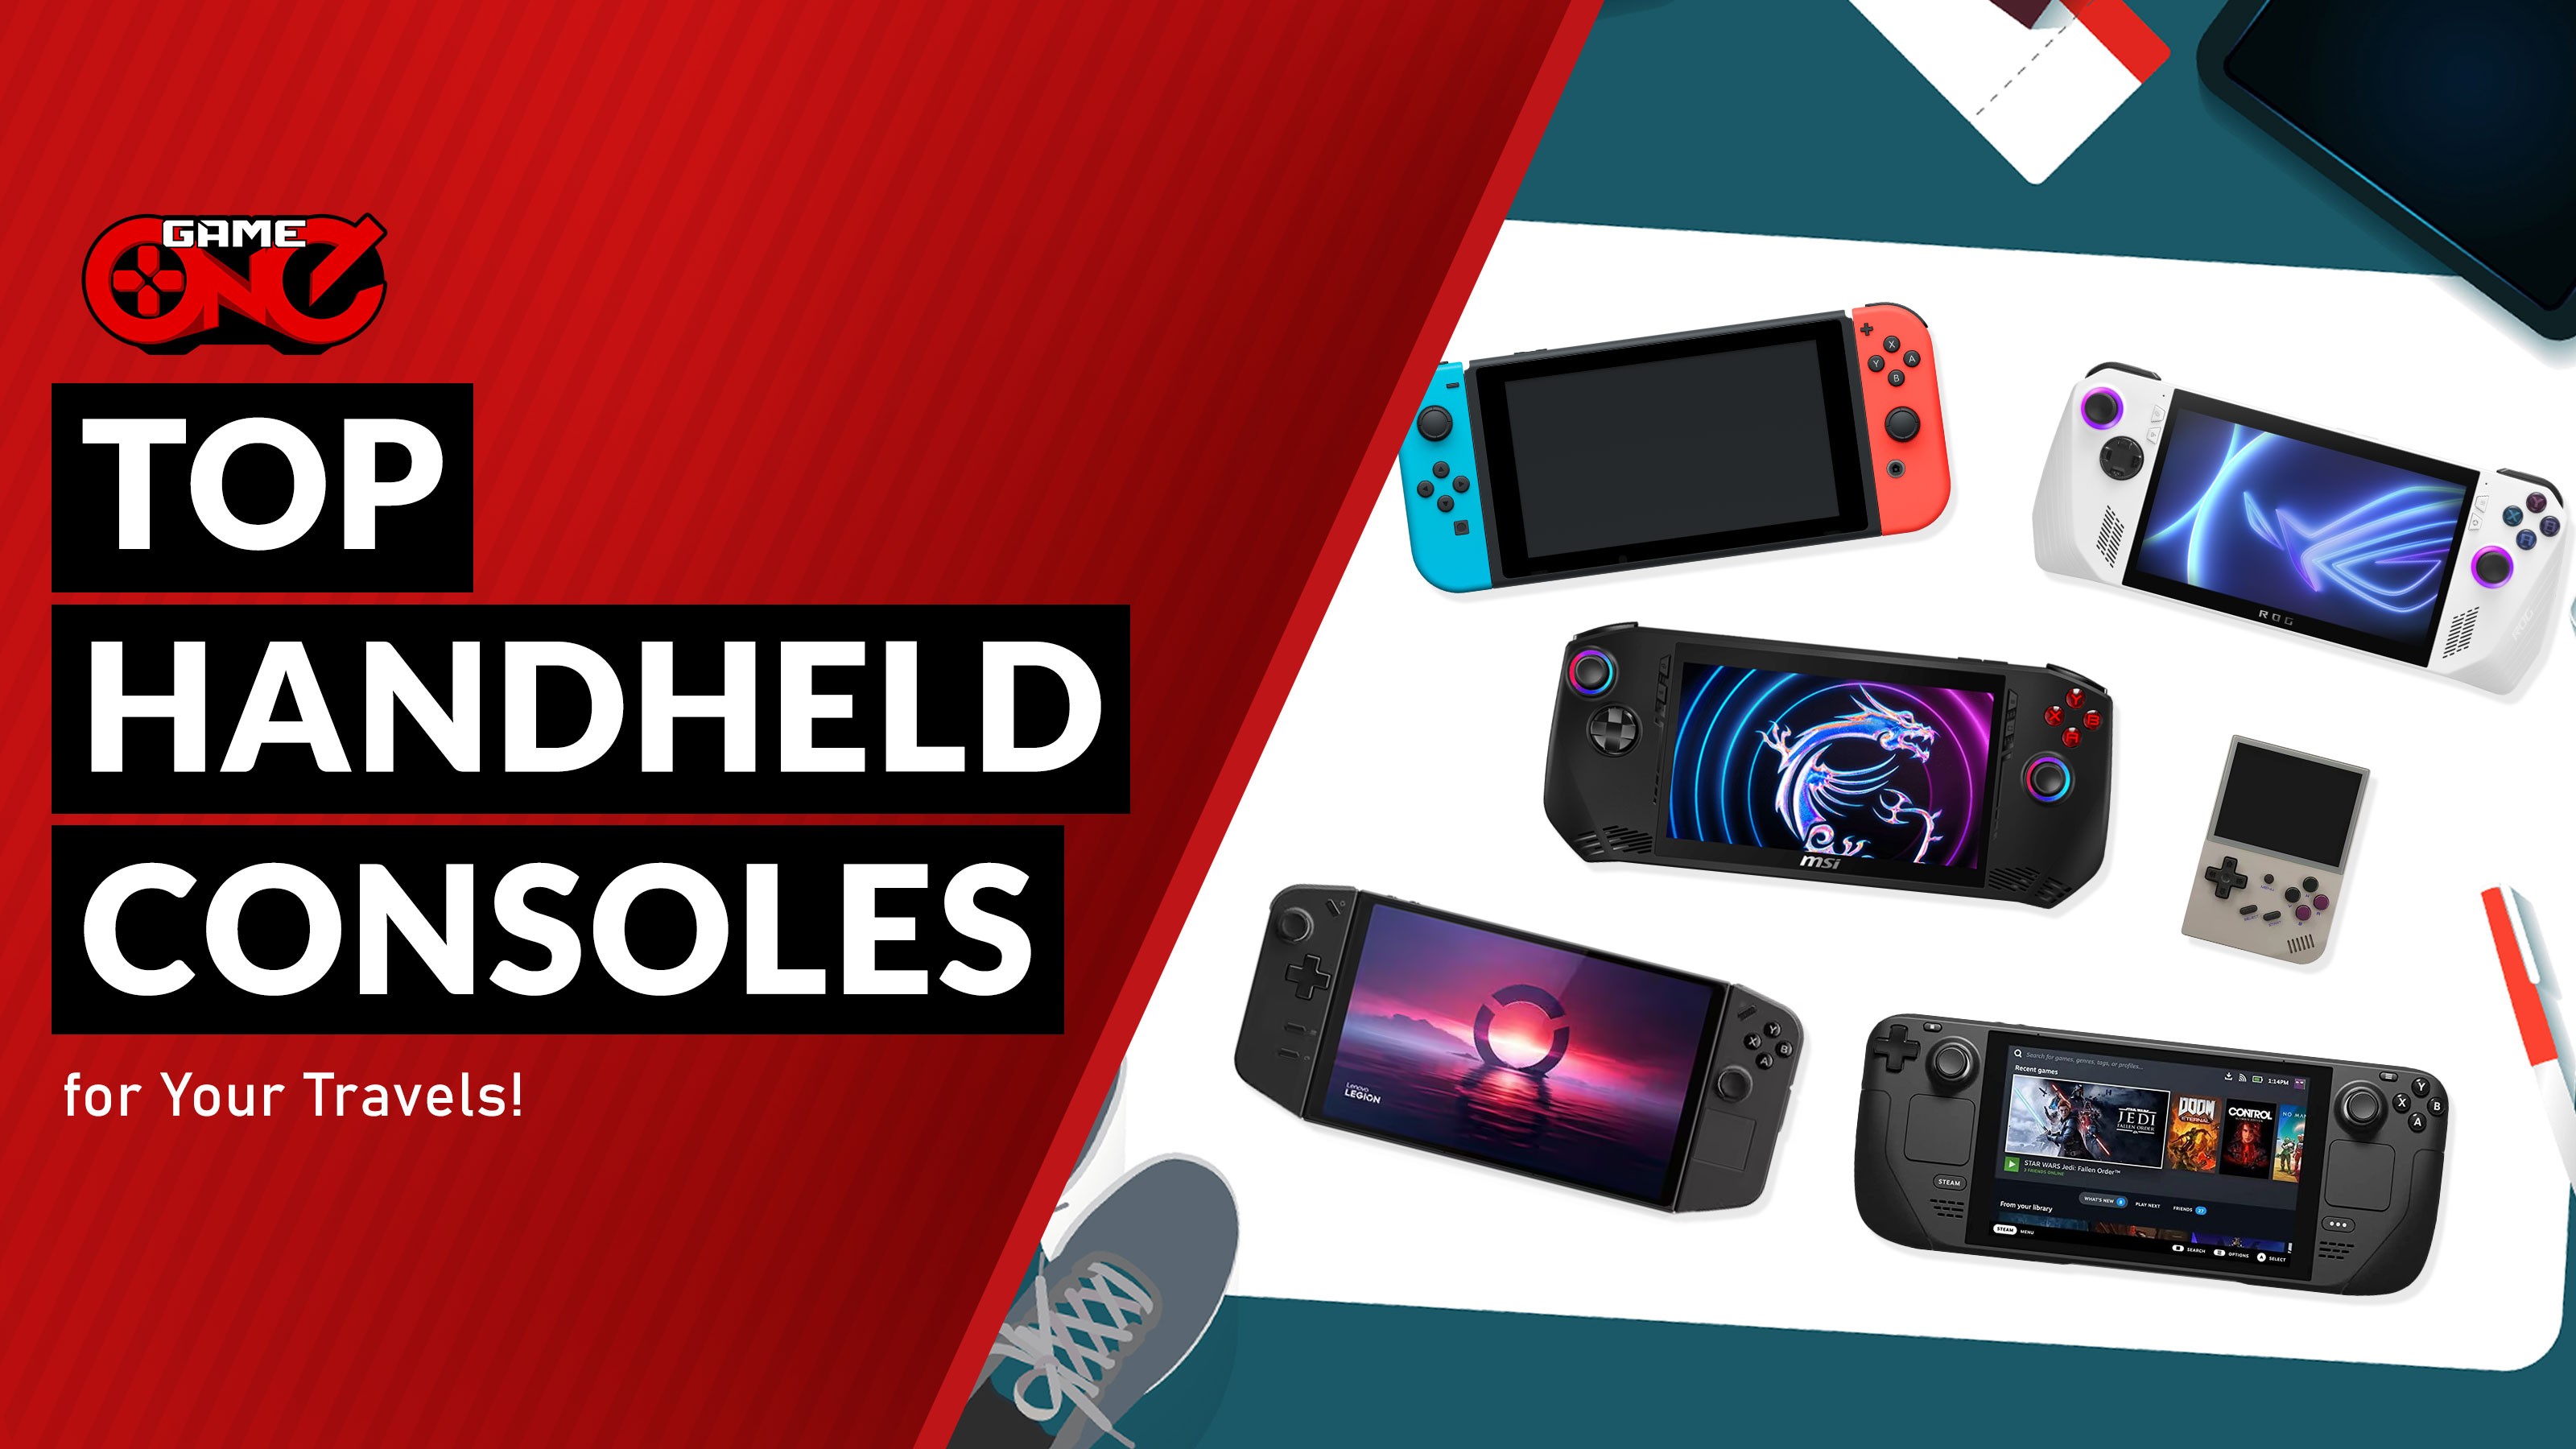 Top Handheld Consoles for Your Travels!